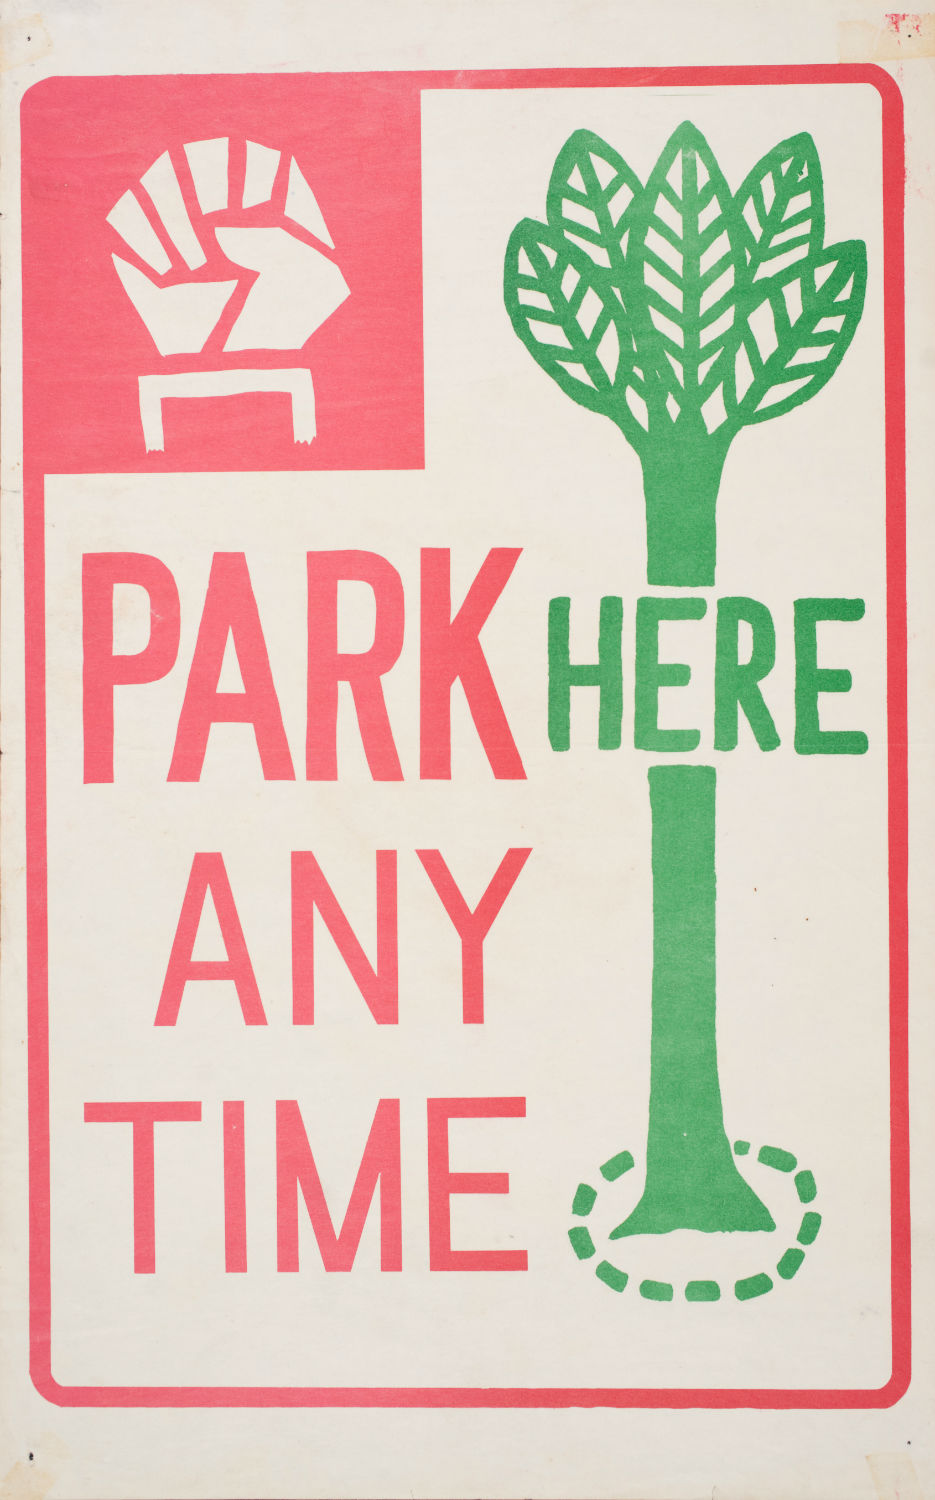 Untitled (Park Here Any Time), 1969; offset lithograph on paper; 17 1⁄2 x 11 in.; collection of Lincoln Cushing/Docs Populi Archive.